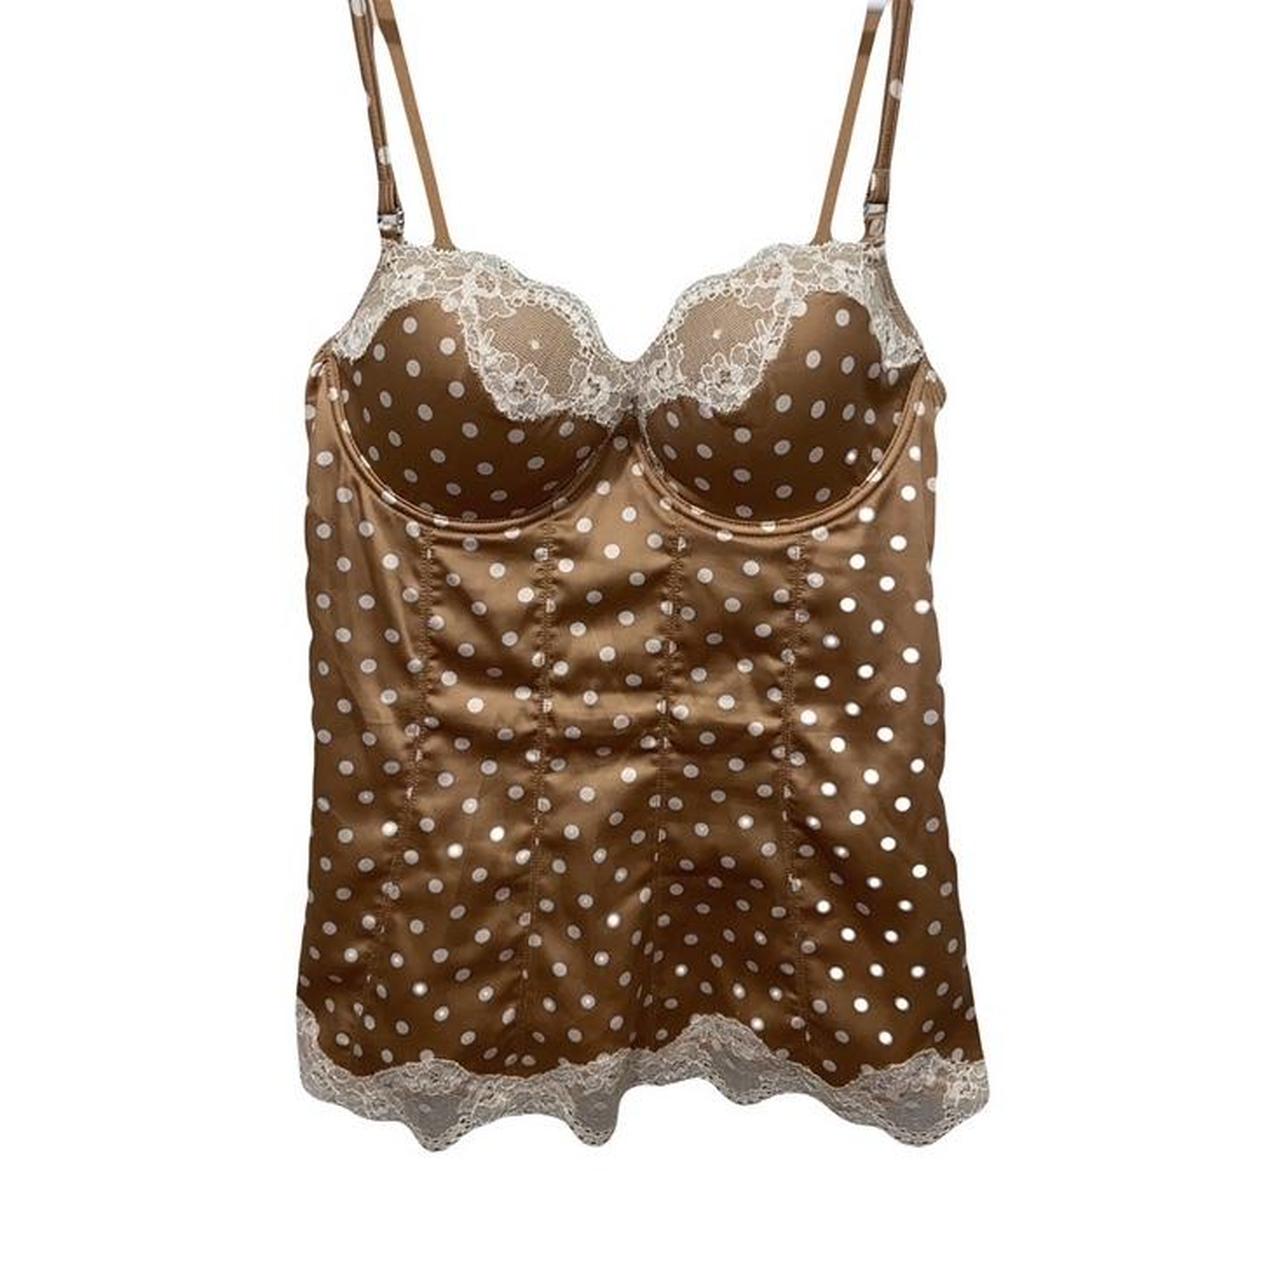 Super Sexy polka dot corset-like top • Cup size... - Depop